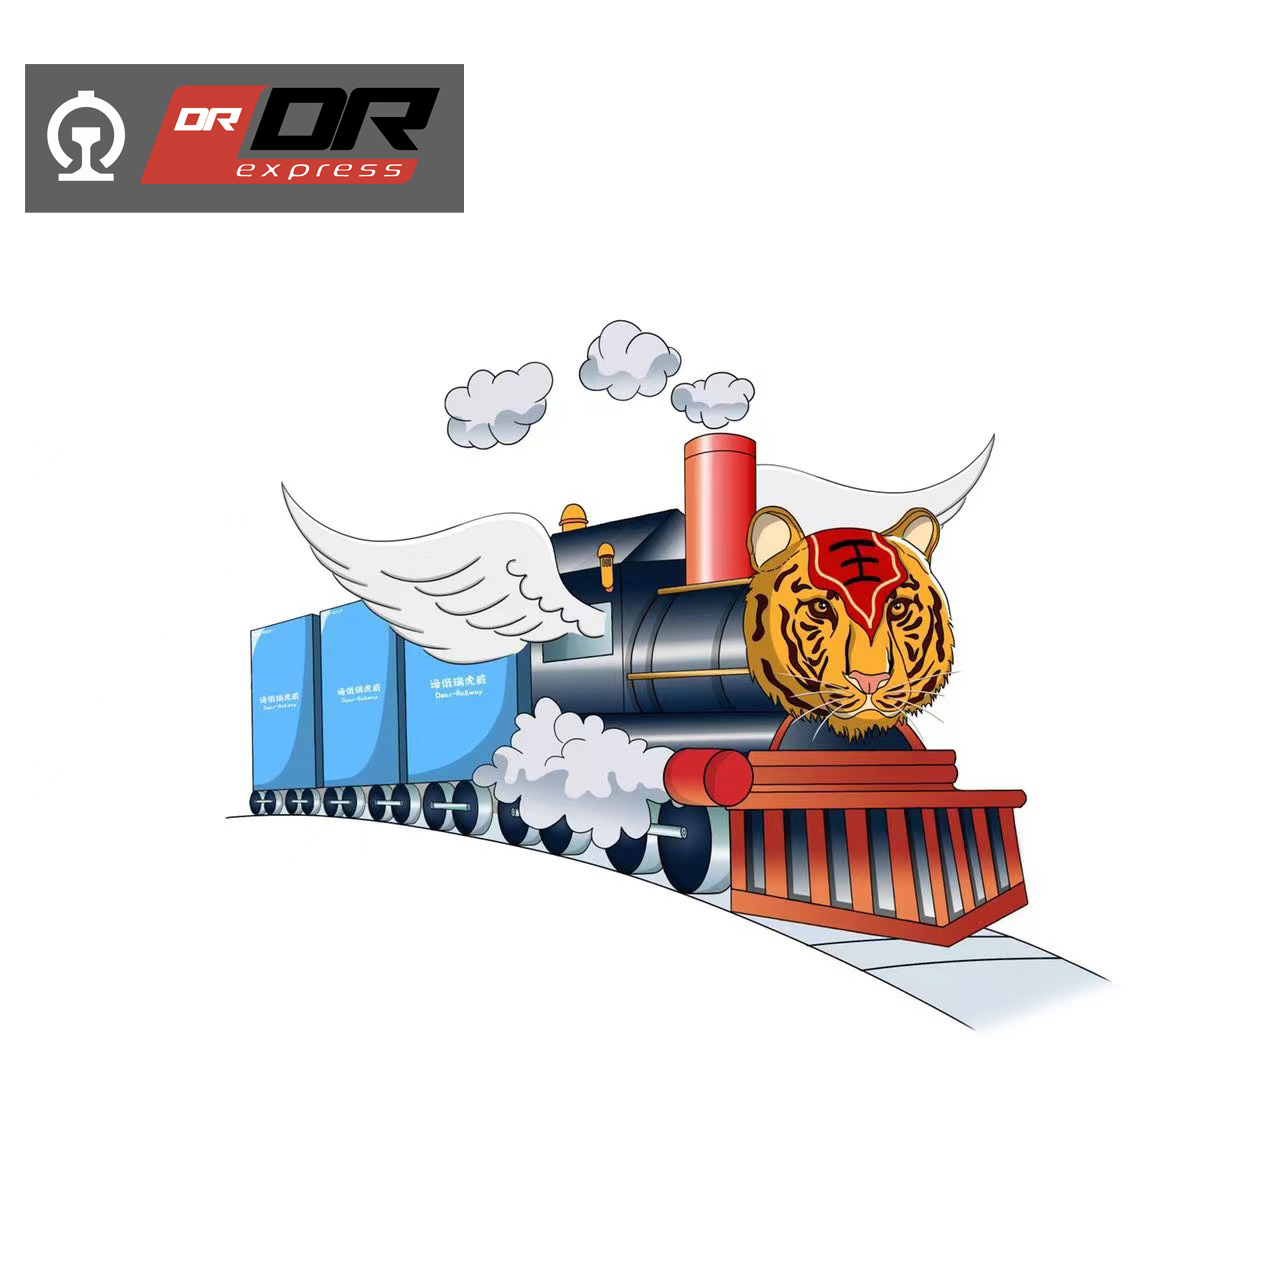 General Cargo with Carton Package Transportation by Railway.